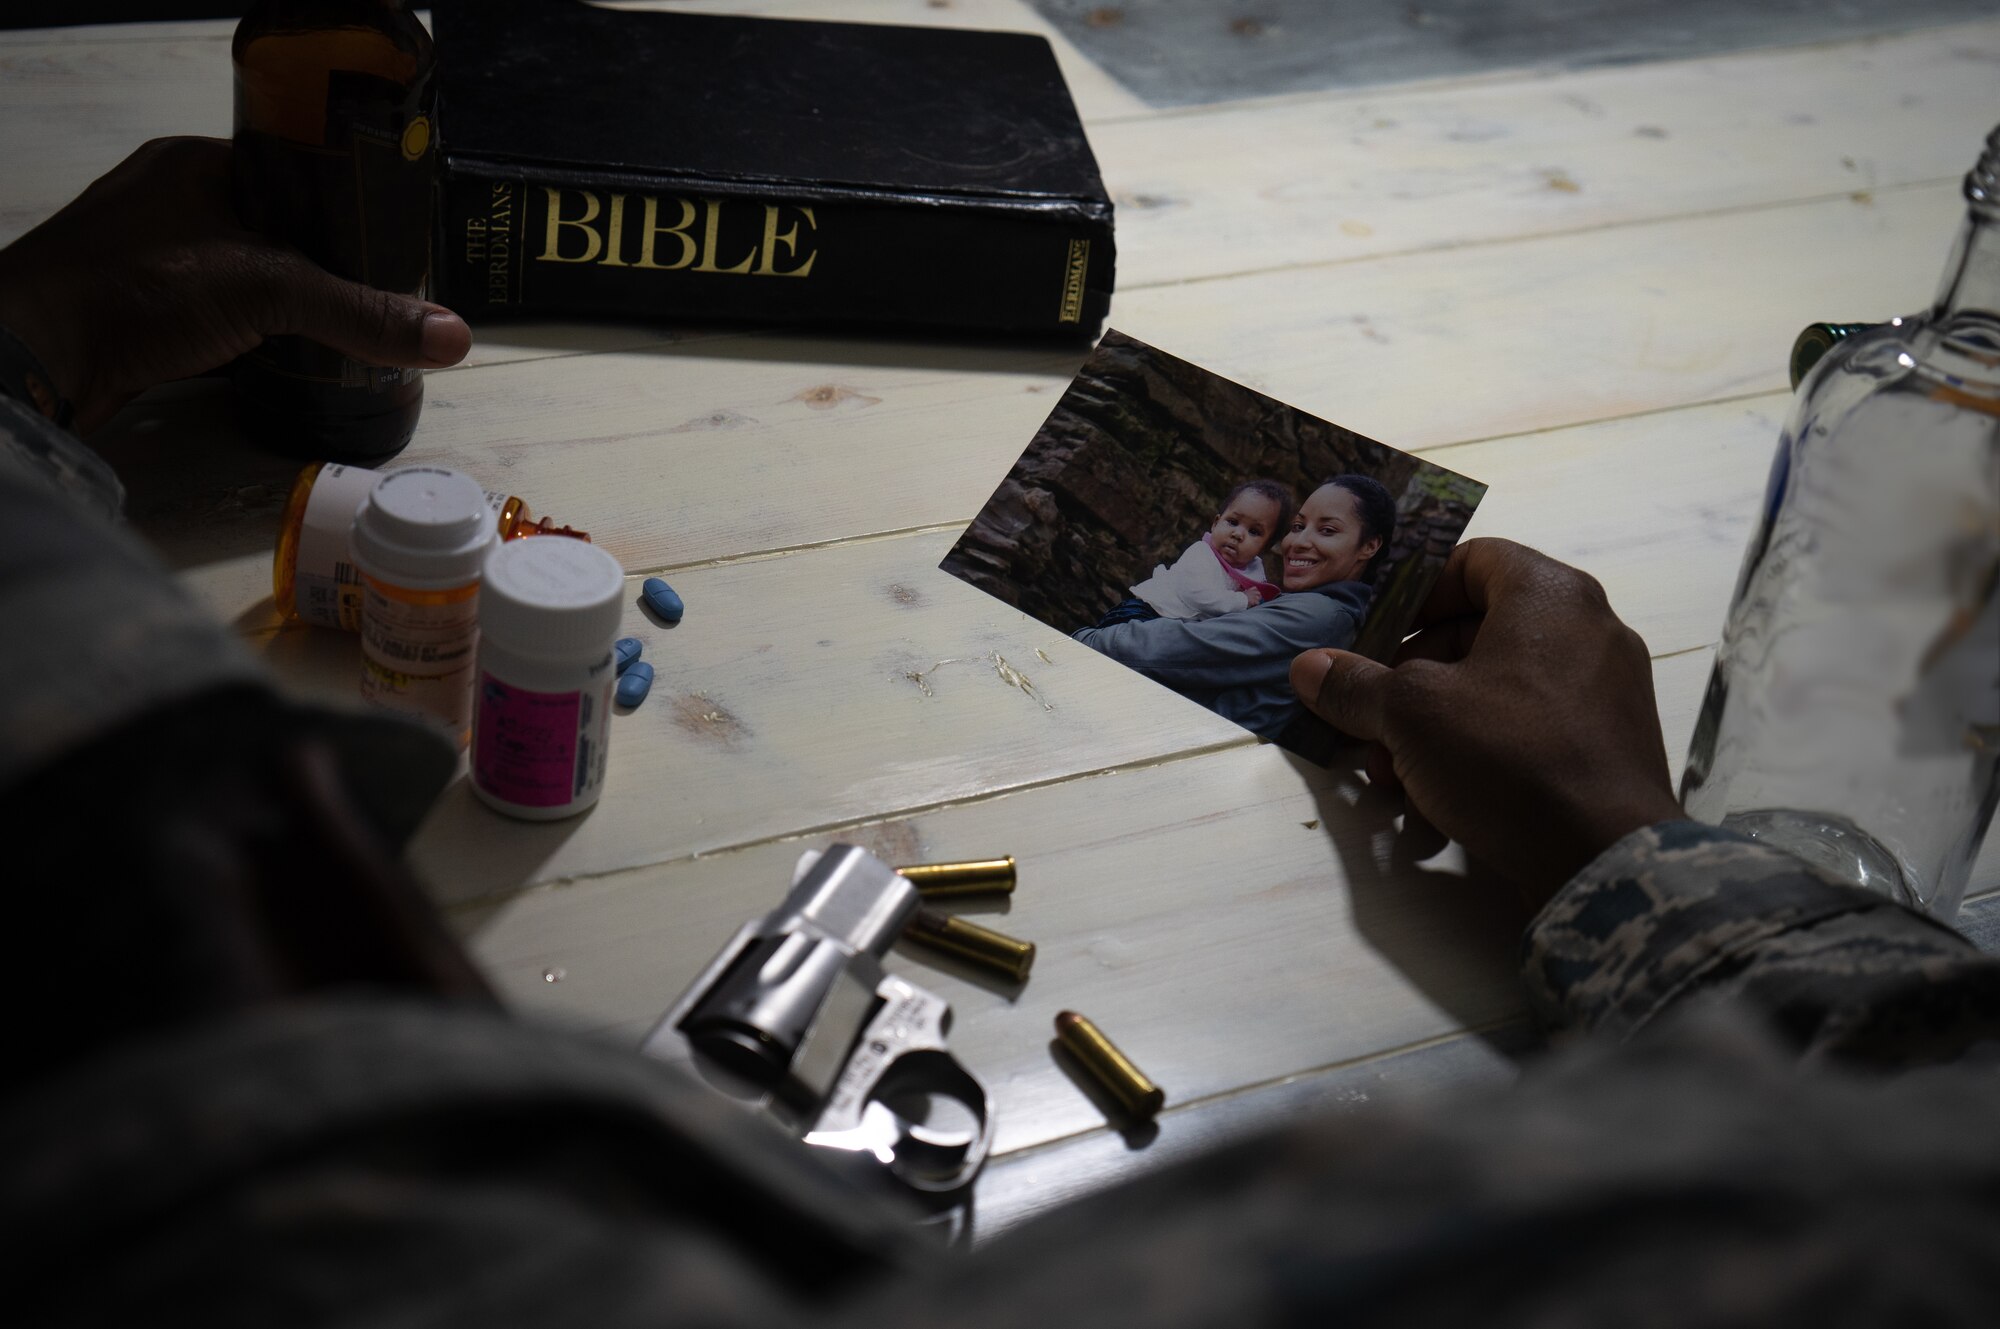 Staff Sgt. Shelton Sherrill, 403rd Wing public affairs specialist, creates a photo illustration showing the different 'methods' of dealing with depression and suicide. (U.S. Air Force photo illustration by Staff. Sgt. Shelton Sherrill)